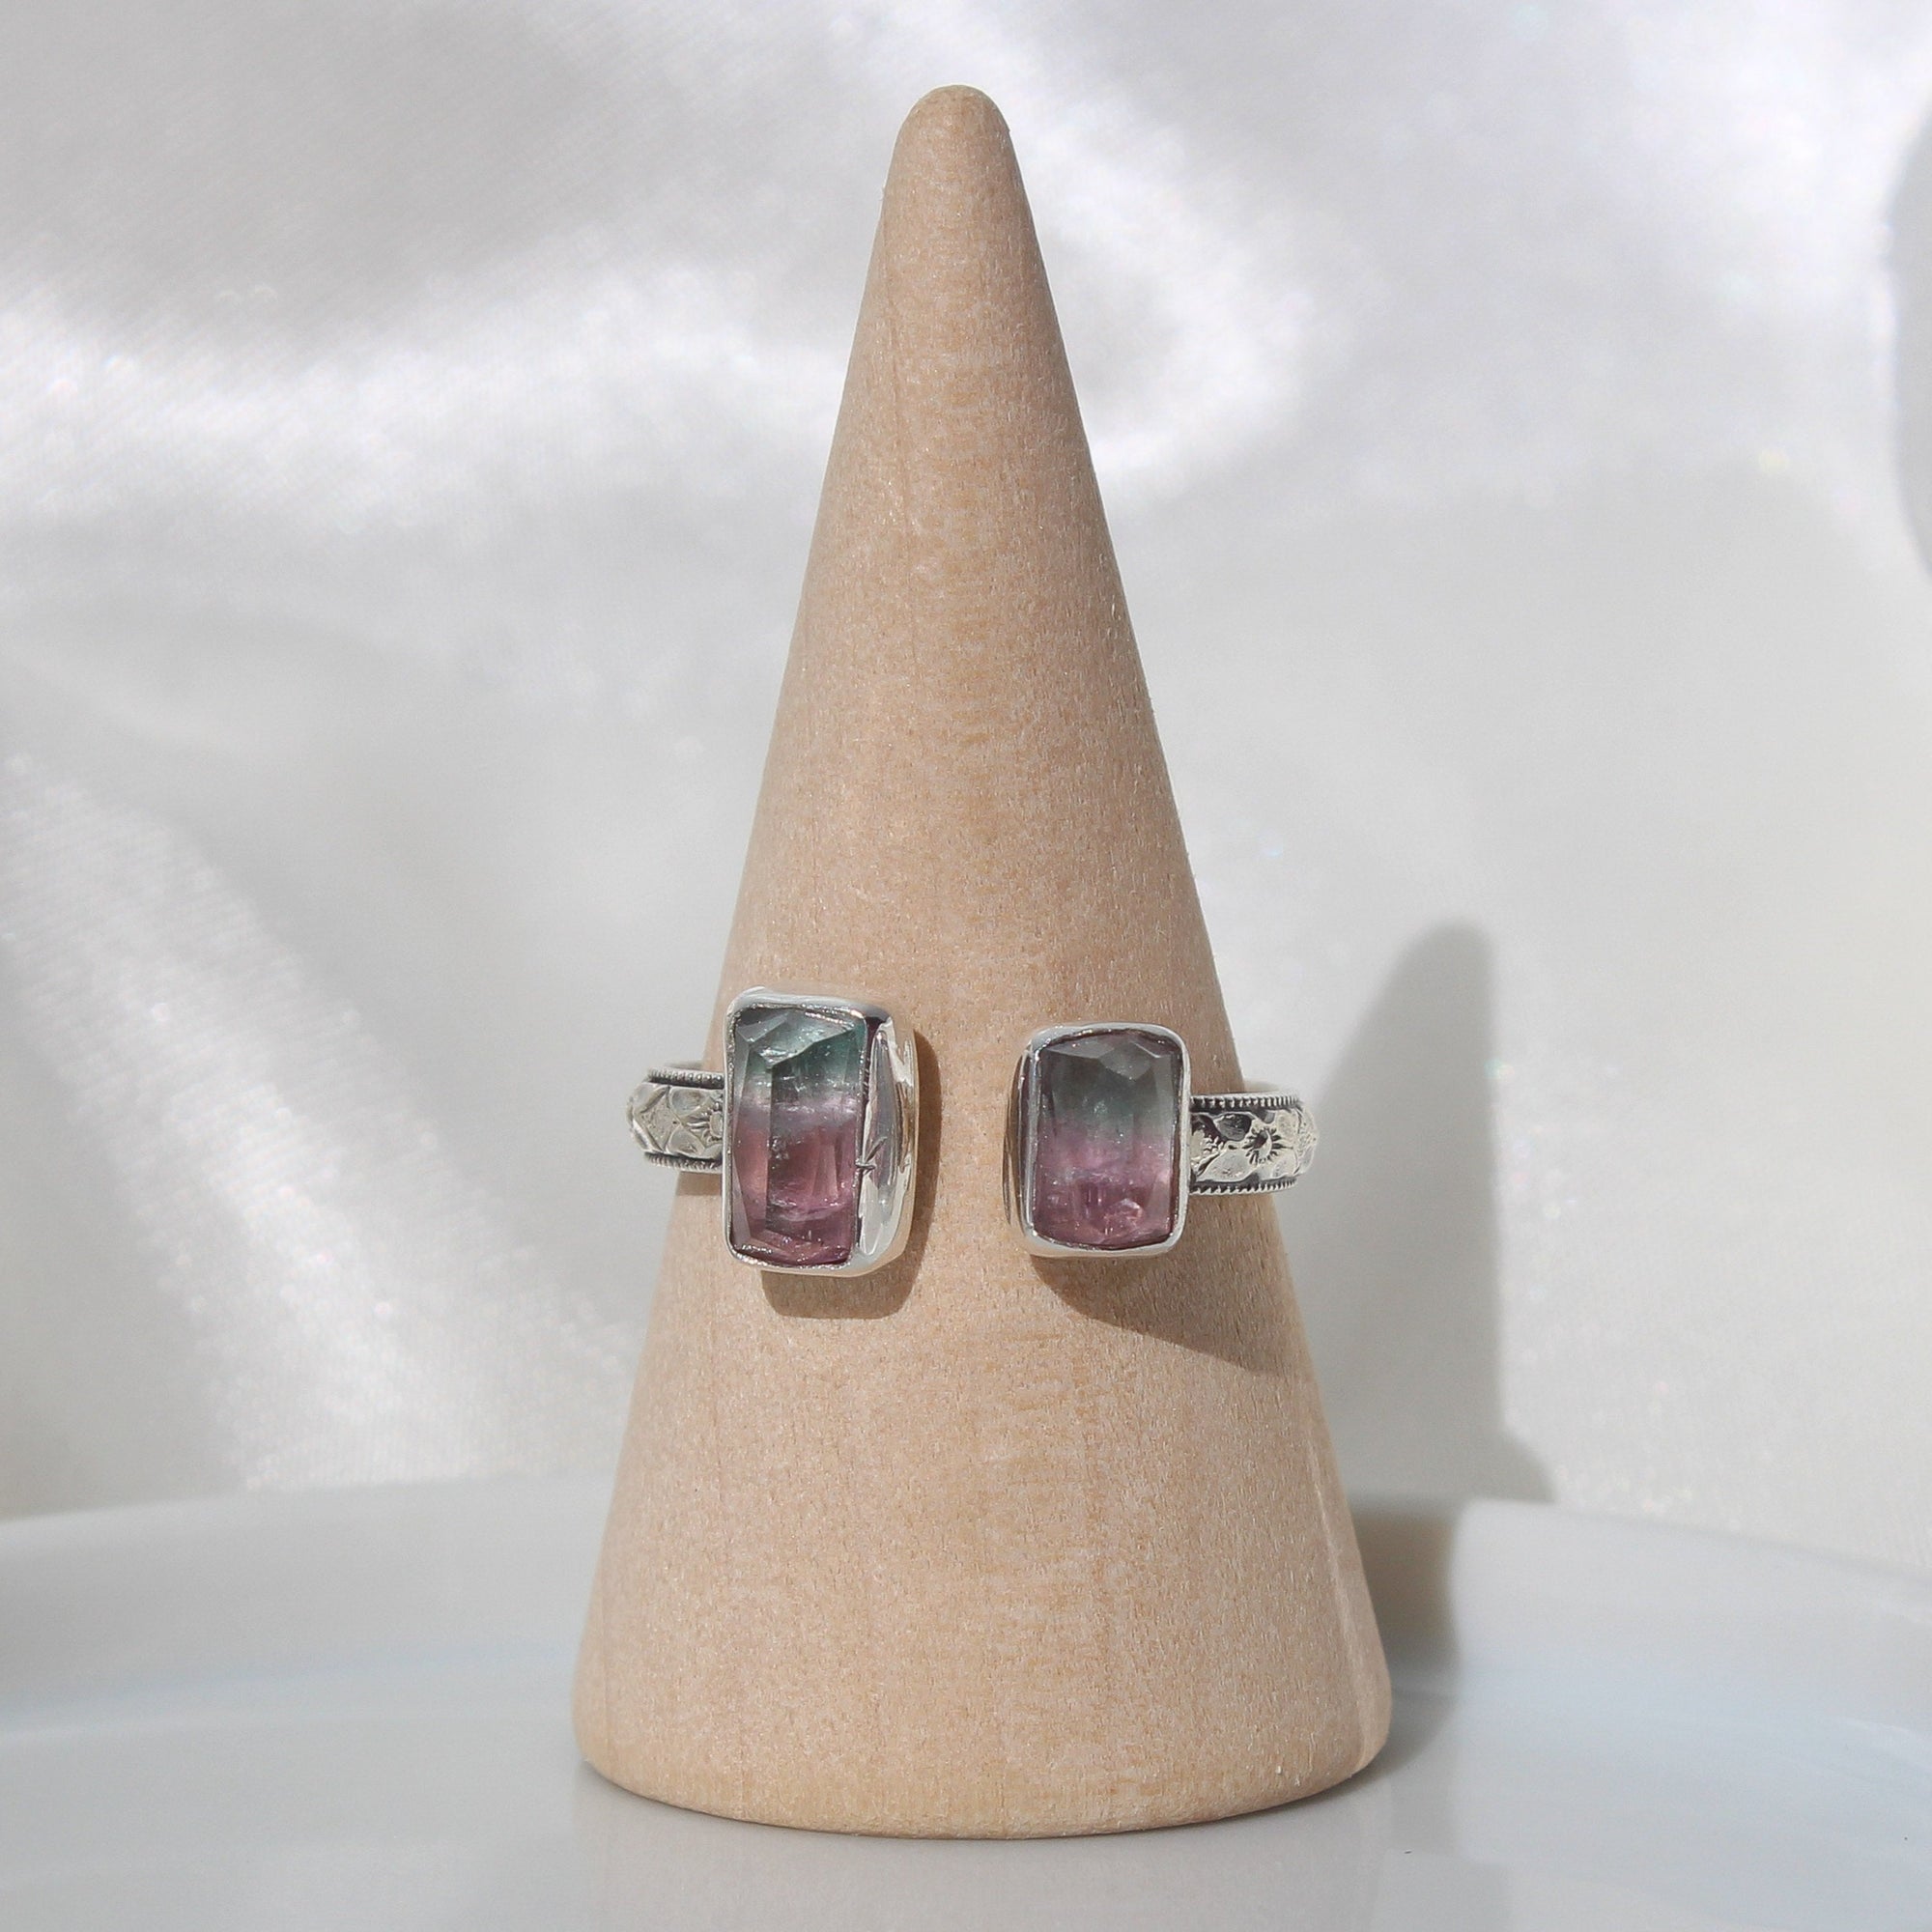 adjustable ring with two rectangular shaped faceted bi color watermelon tourmaline stones on a patterned band